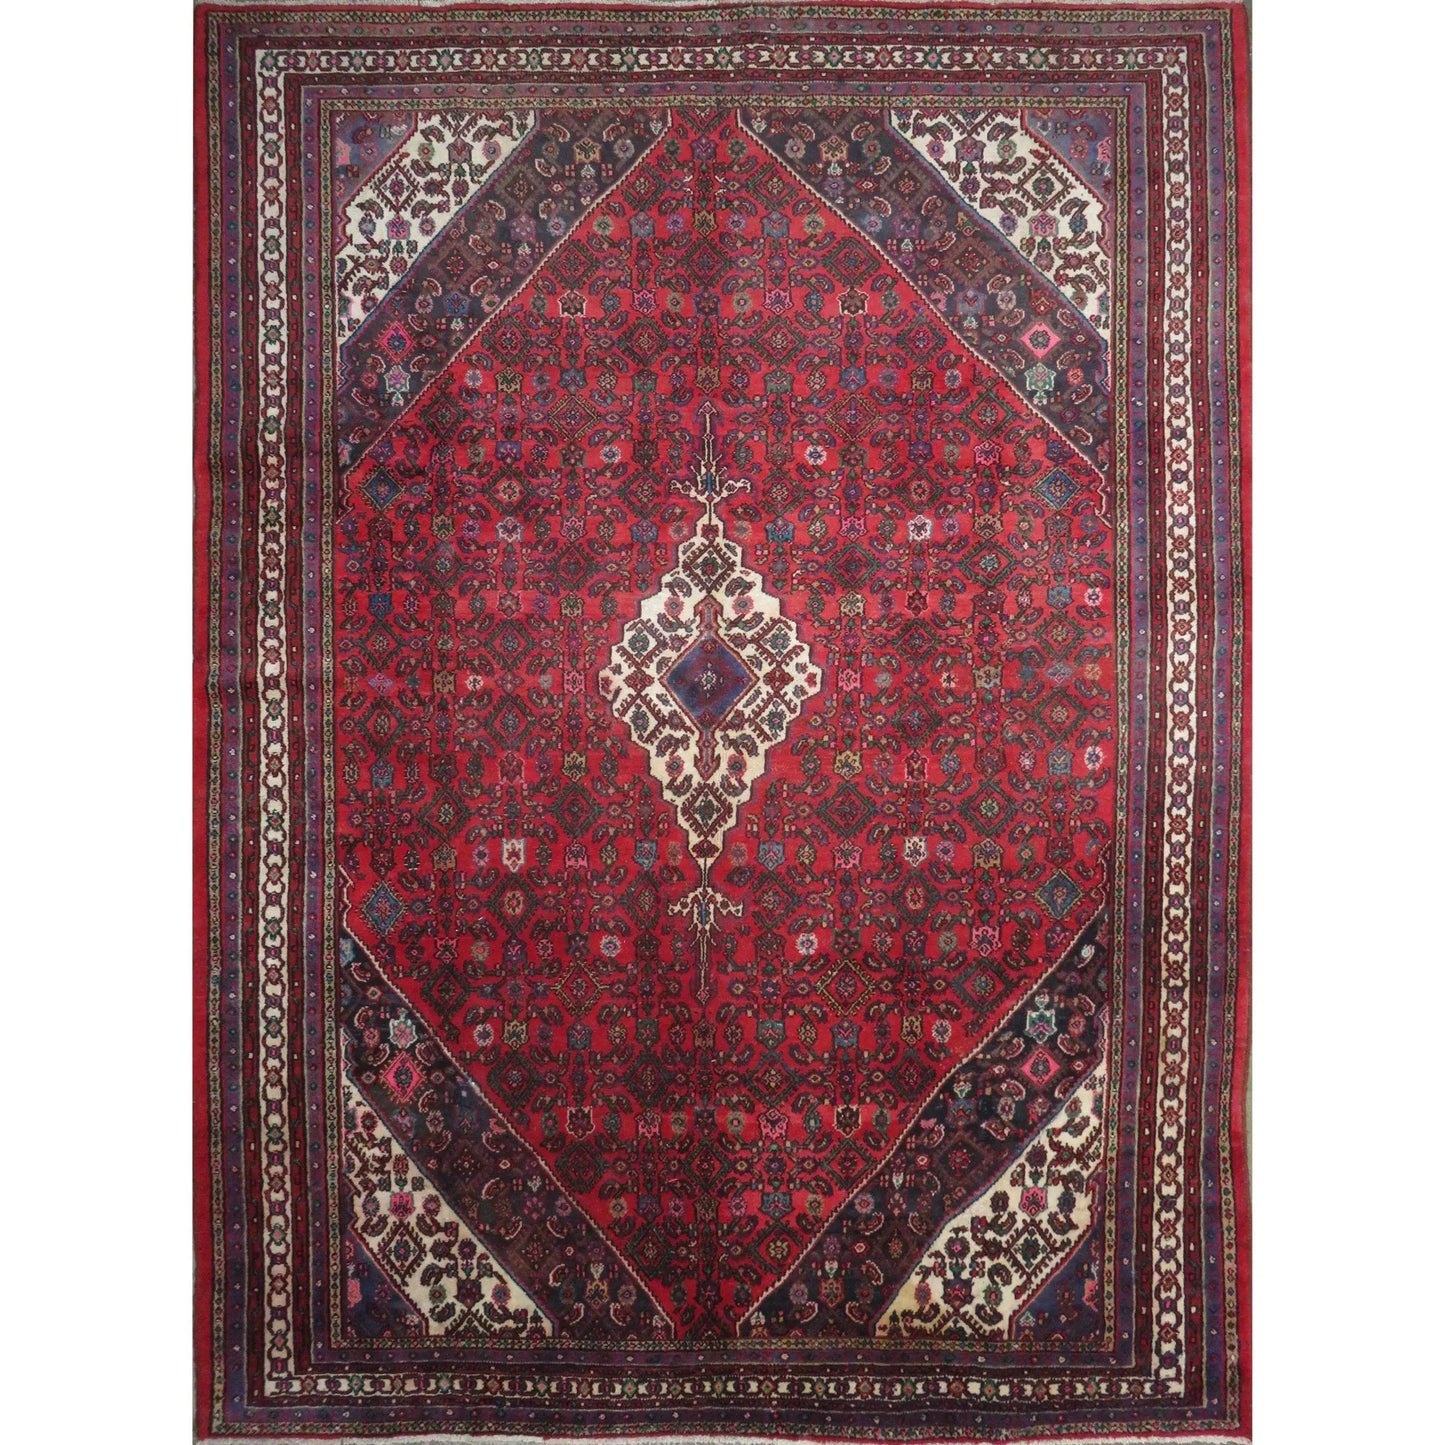 Hand-Knotted Persian Wool Rug _ Luxurious Vintage Design, 11'9" x 8'3", Artisan Crafted